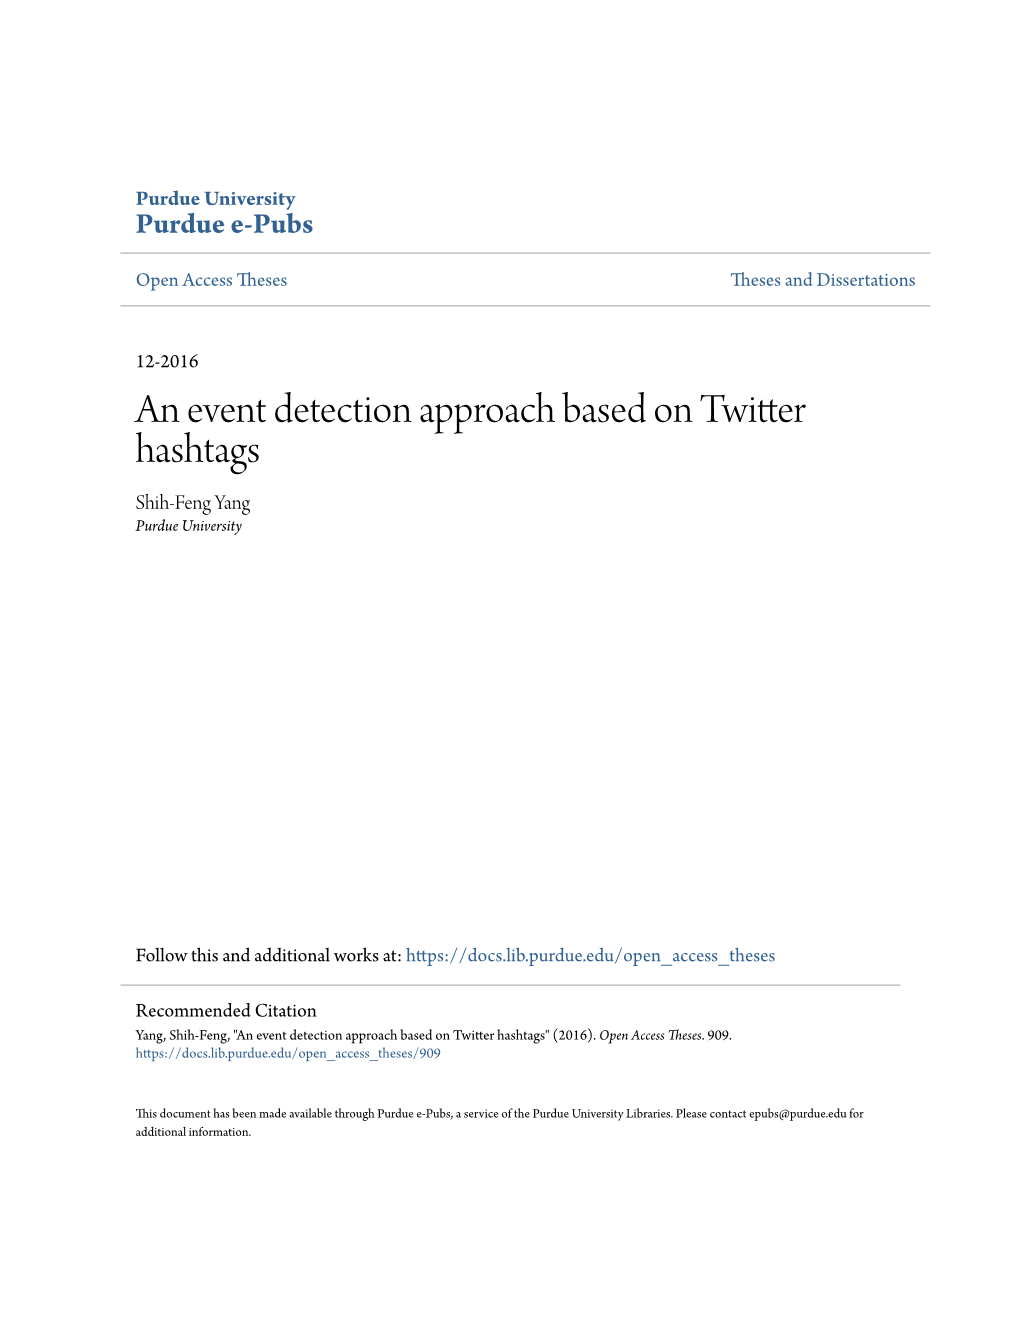 An Event Detection Approach Based on Twitter Hashtags Shih-Feng Yang Purdue University